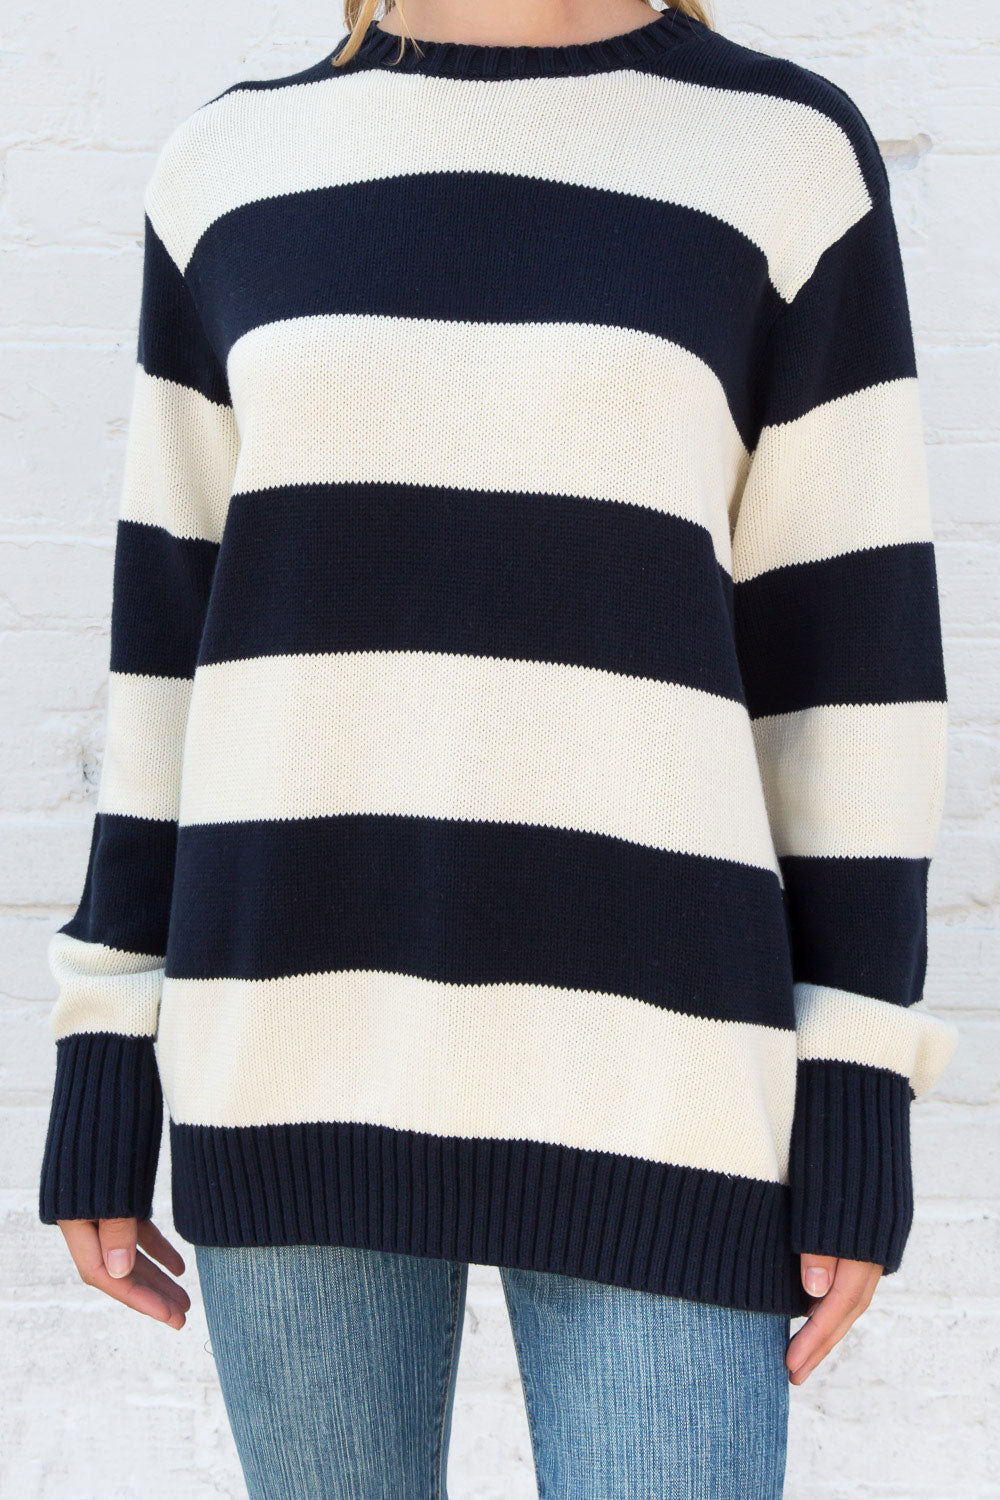 White With Navy Blue Stripes / Oversized Fit